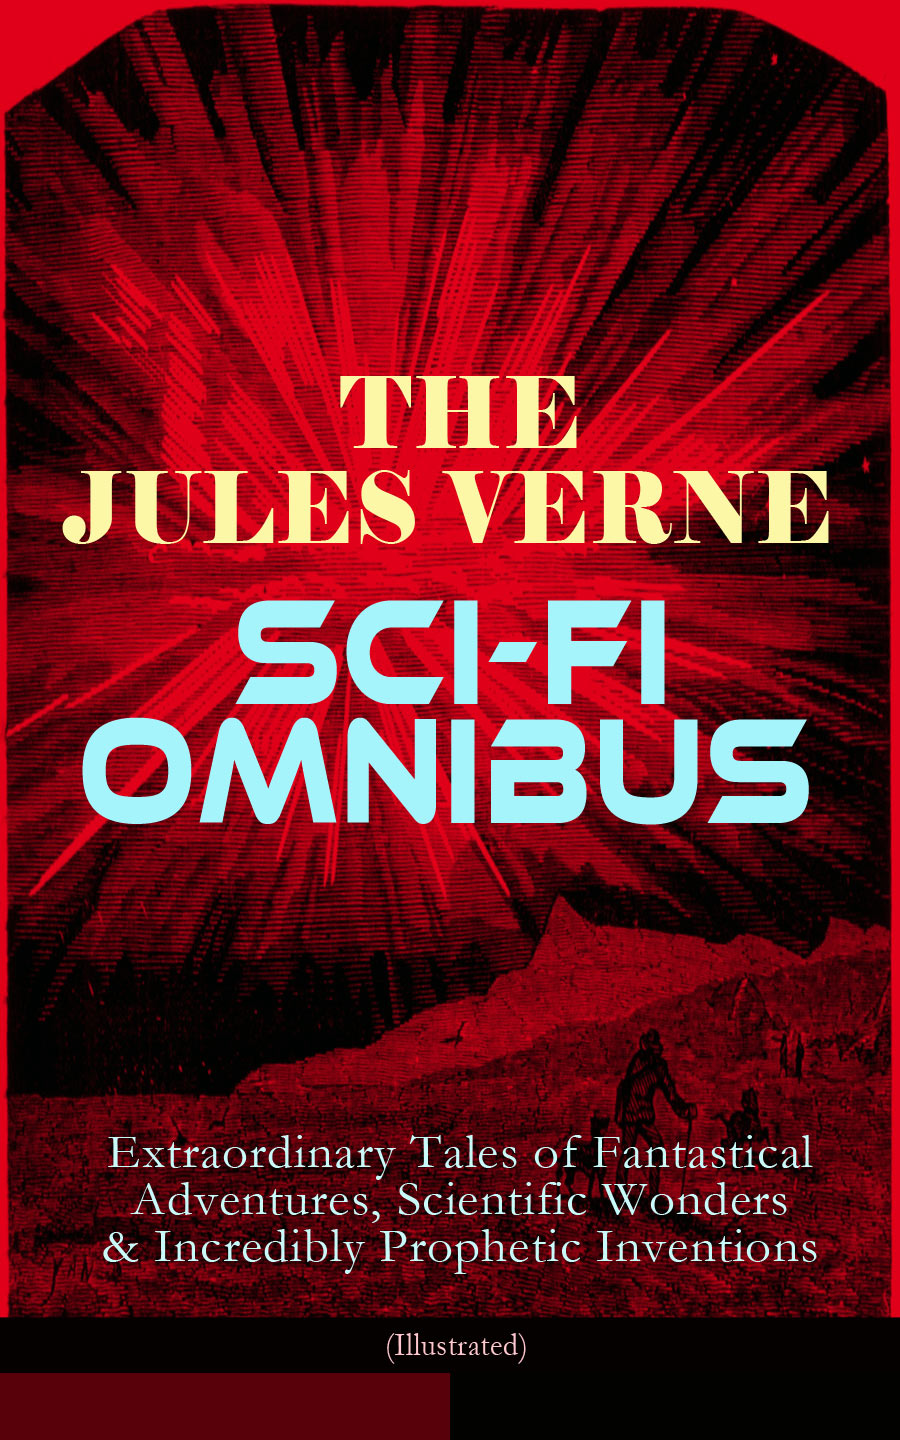 The Jules Verne Sci-Fi Omnibus--Extraordinary Tales of Fantastical Adventures, Scientific Wonders & Incredibly Prophetic Inventions (Illustrated)